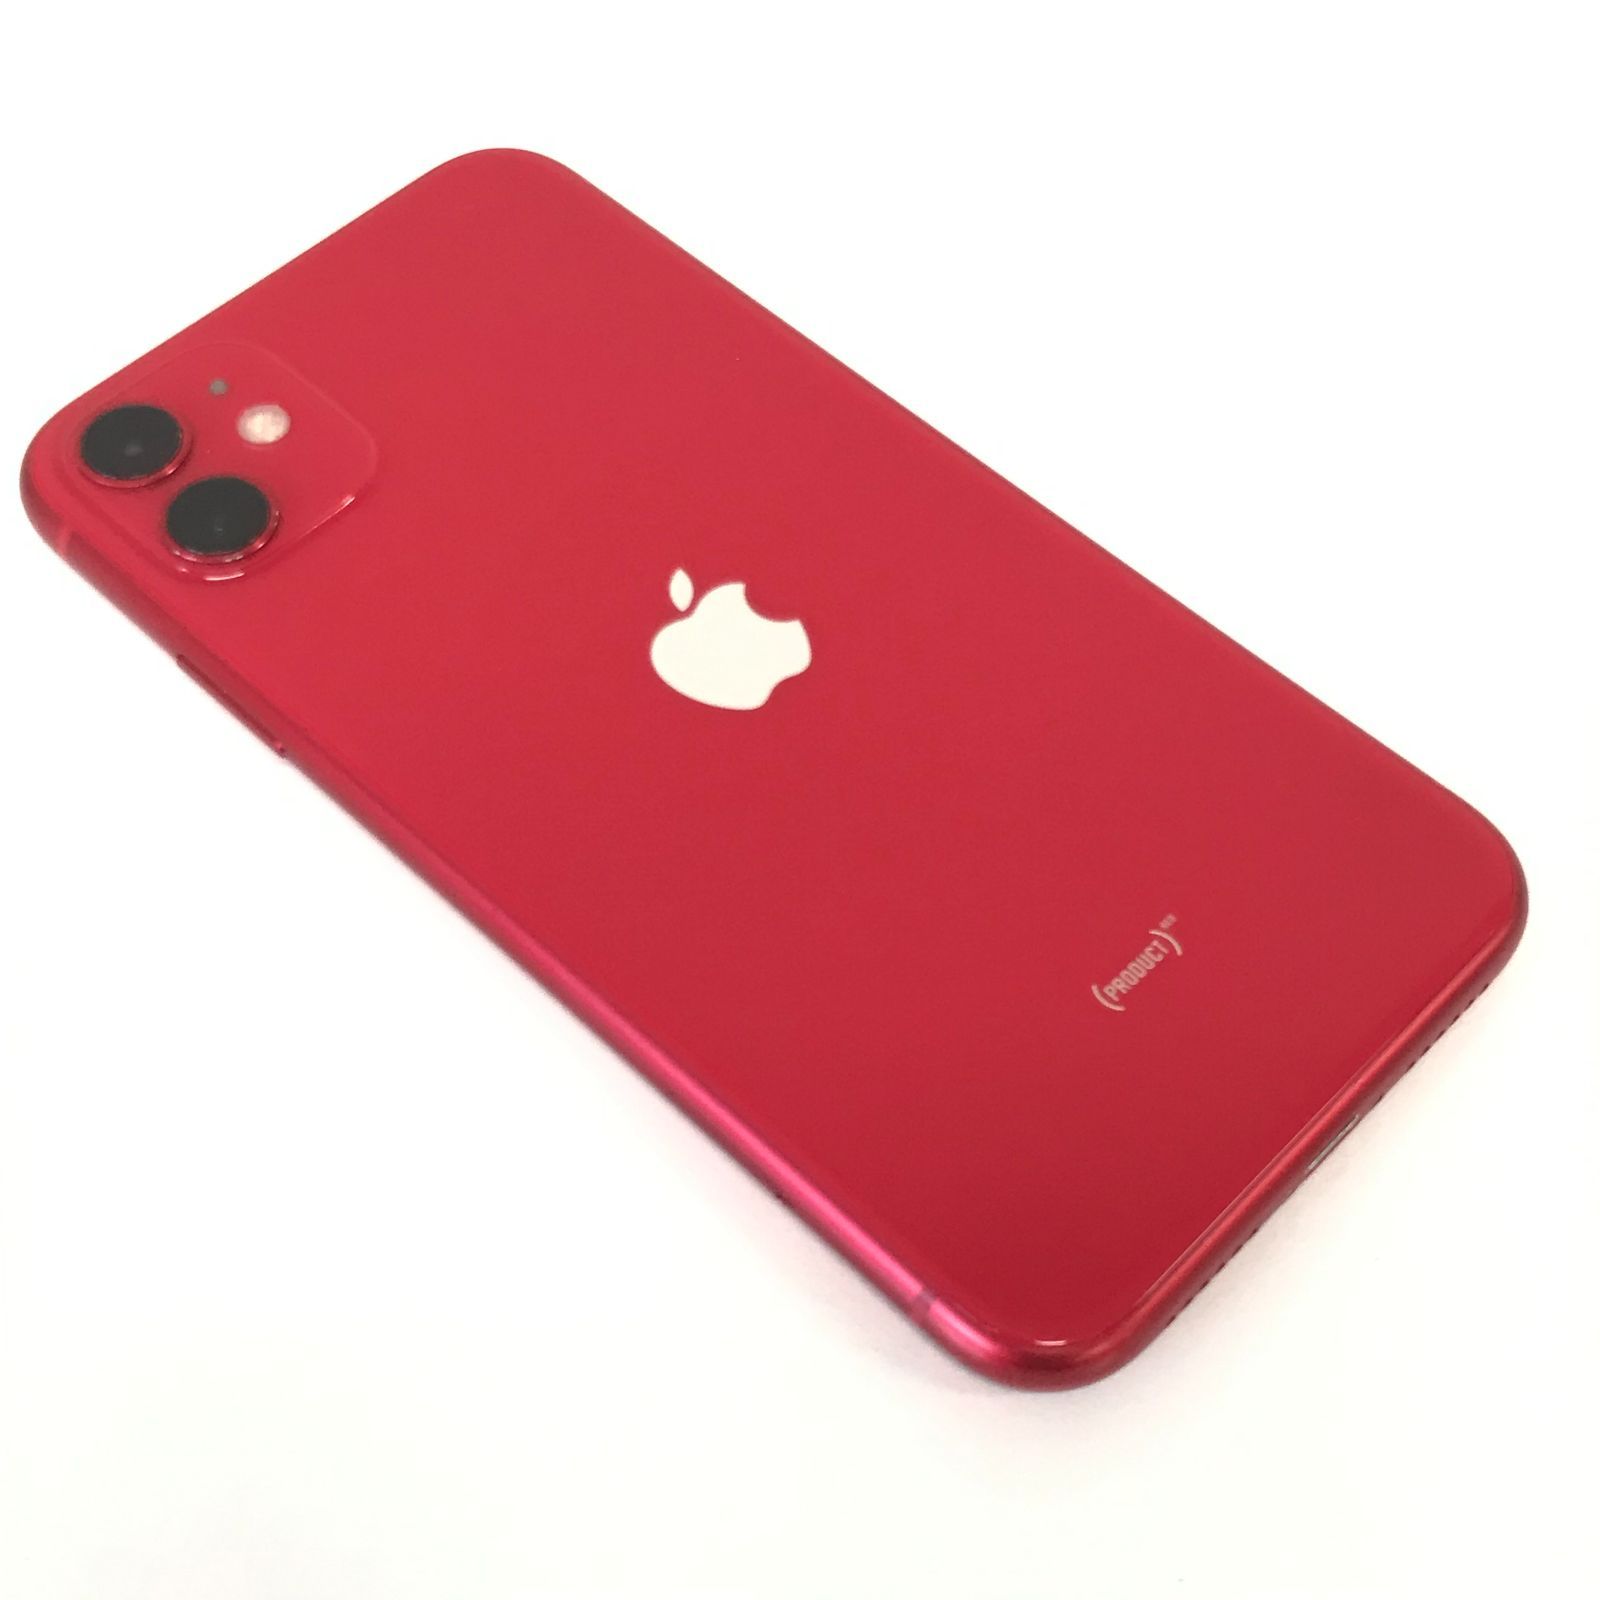 iPhoneiPhone 11 (PRODUCT)RED 64 GB SIMフリージャンク